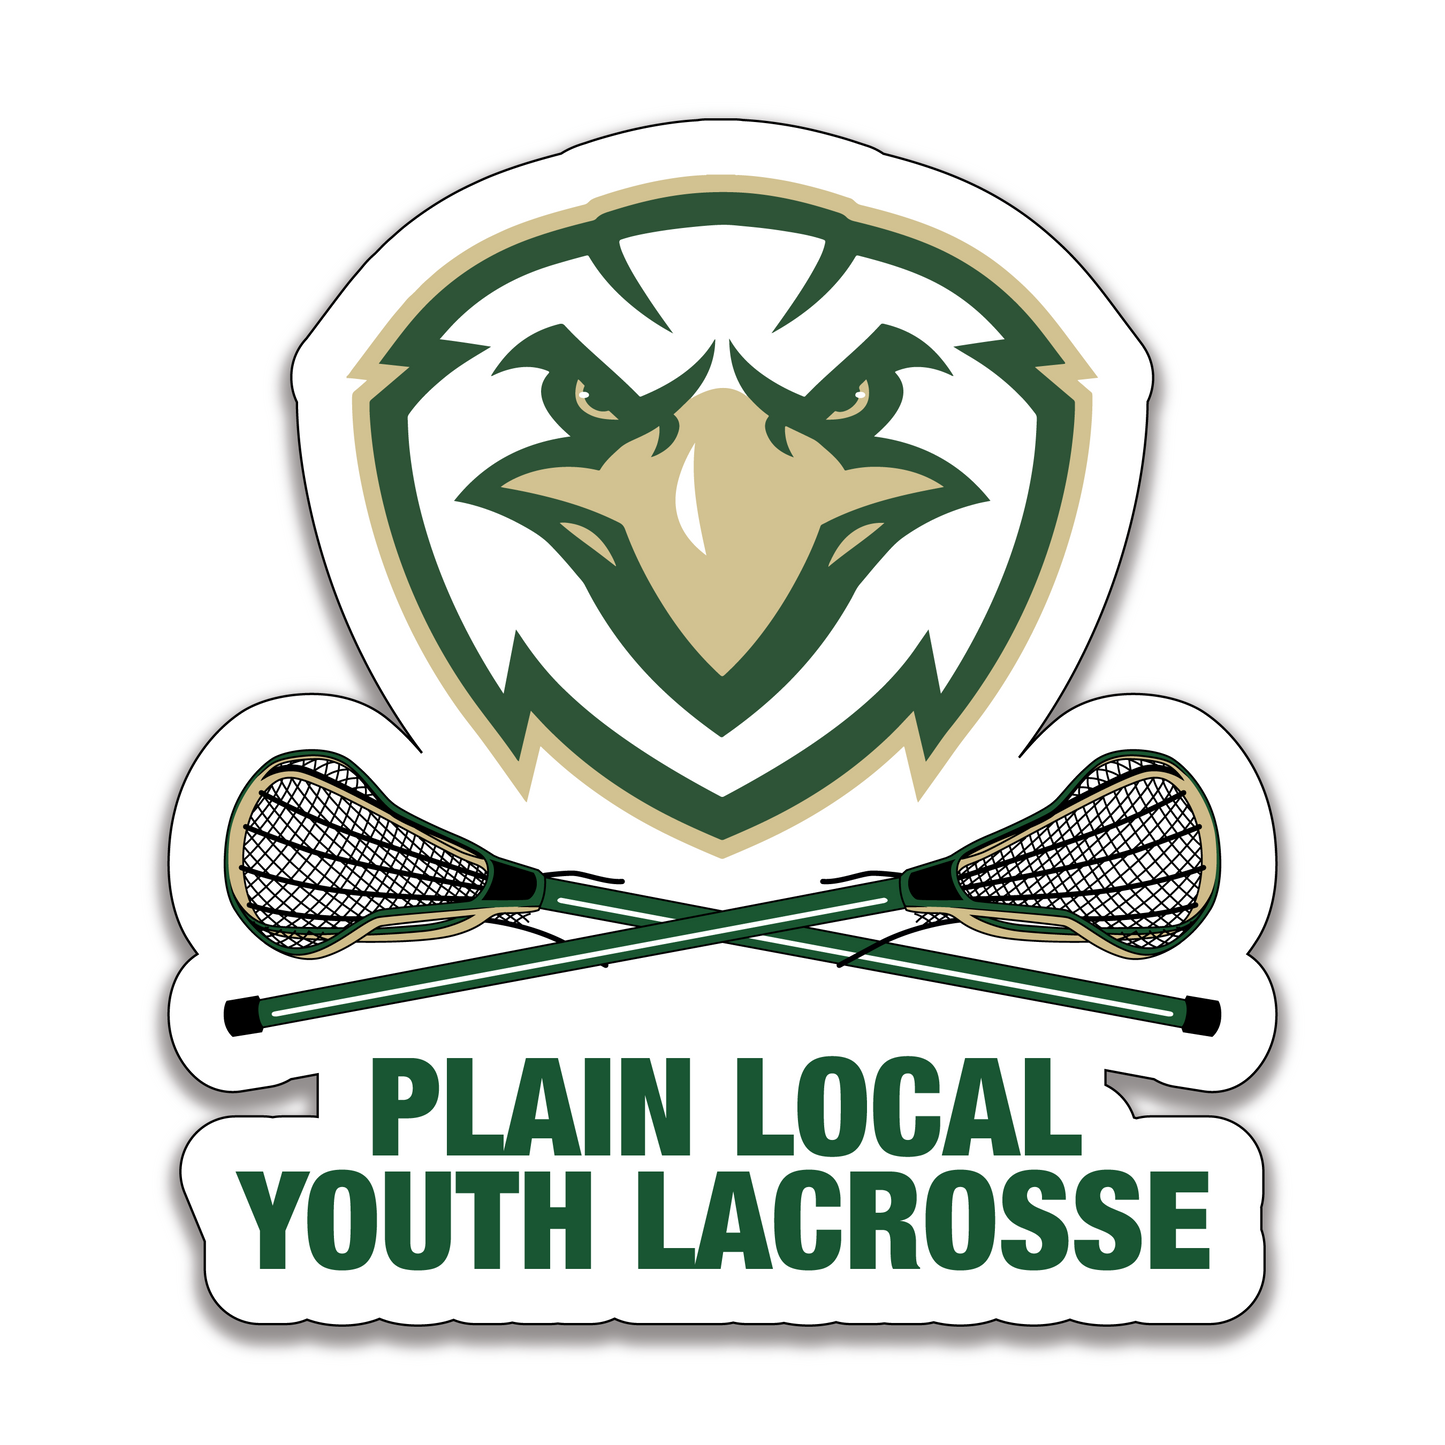 Plain Local Youth Lacrosse Decal - 4" w x 3.5" h